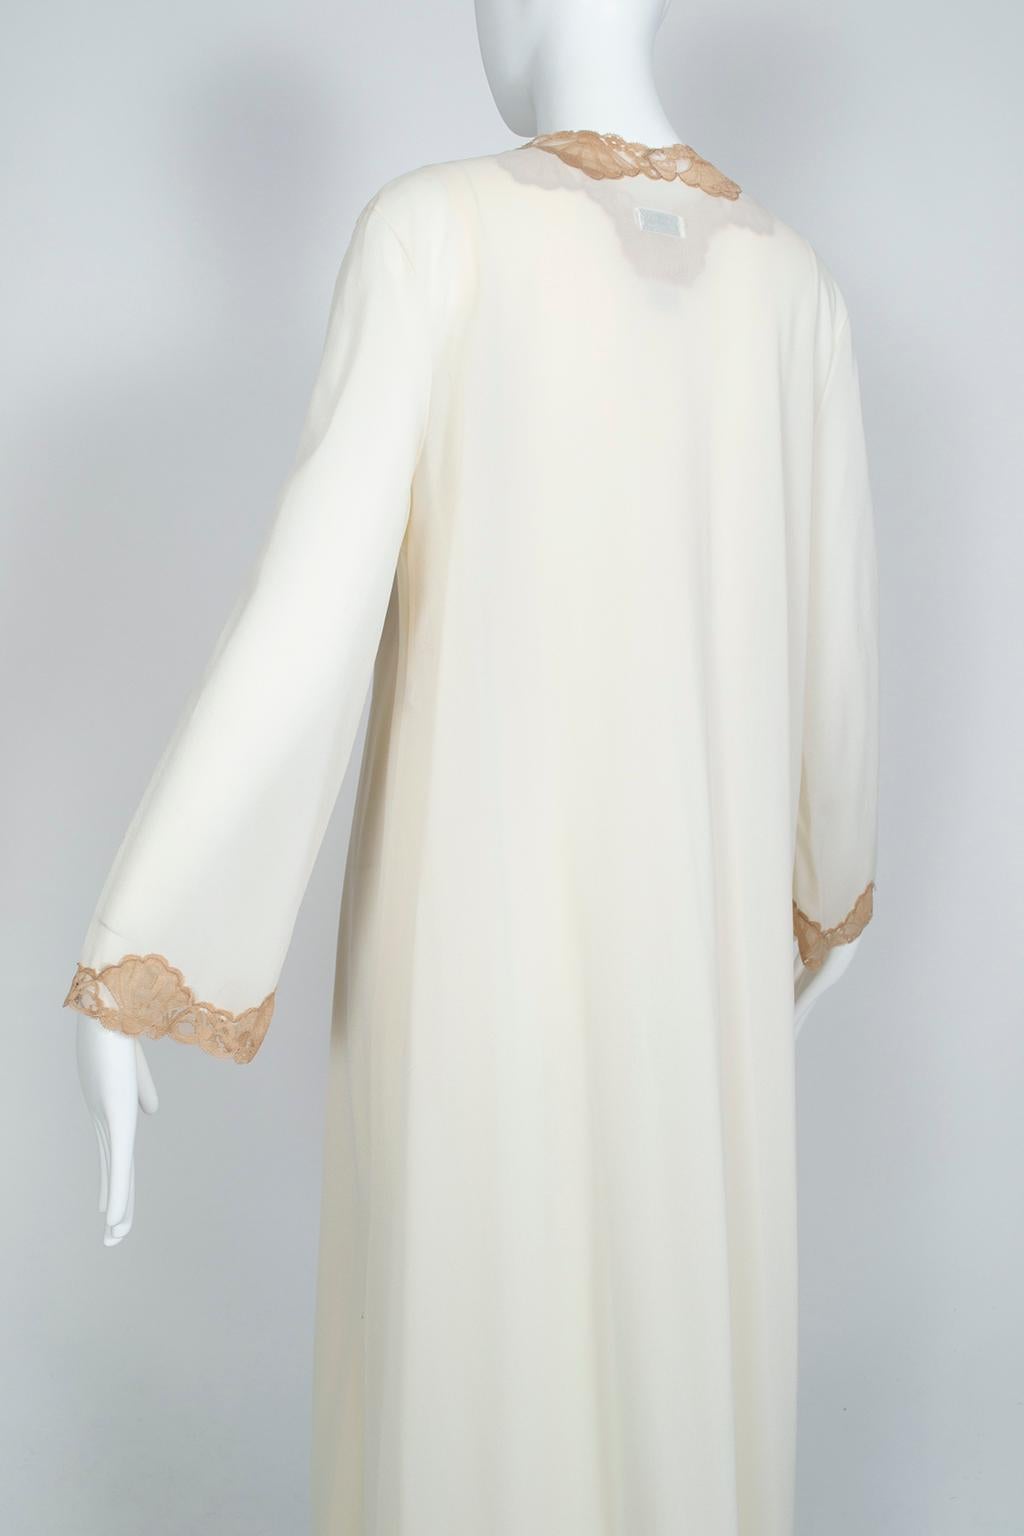 Emilio Pucci Formfit Rogers Ivory Bridal Peignoir Gown and Robe Set – M, 1960s 4